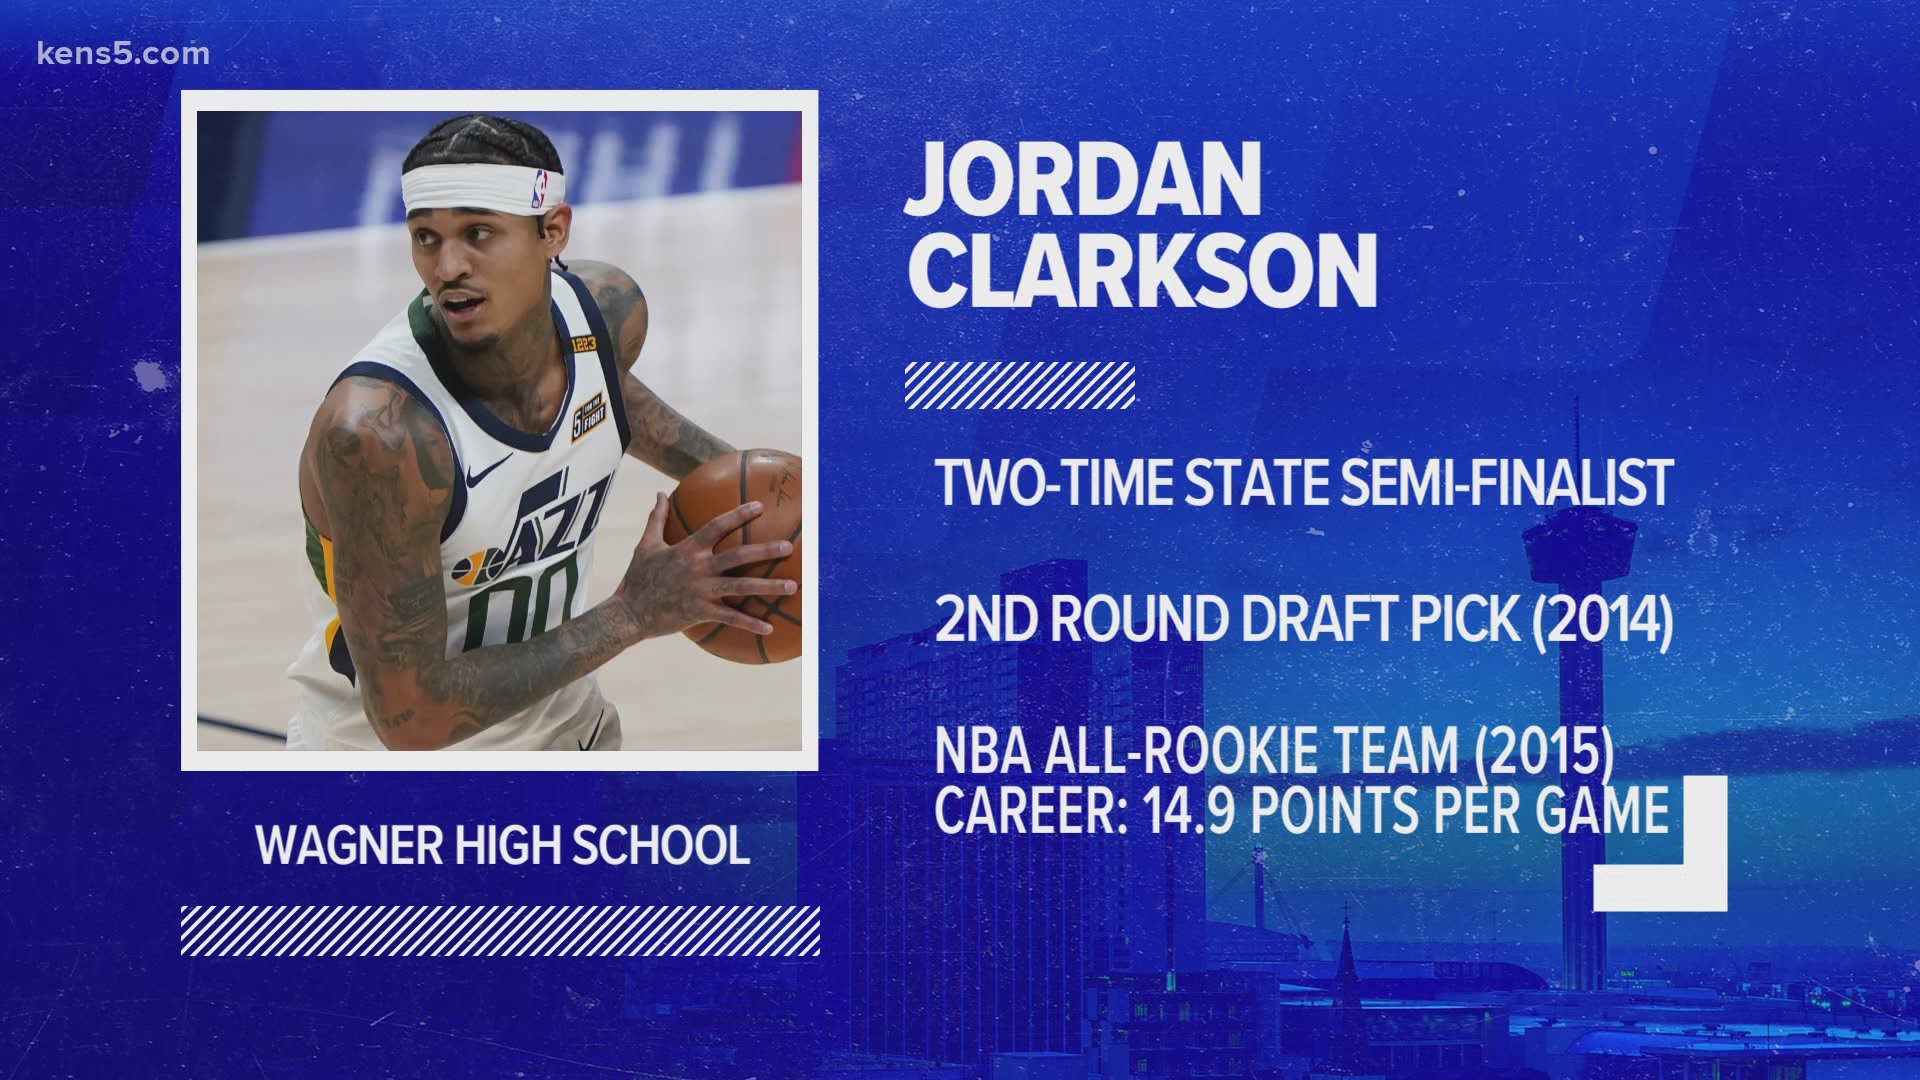 Before doing damage as a member of the Utah Jazz, Clarkson was making a name for himself at Wagner High School in south Texas.